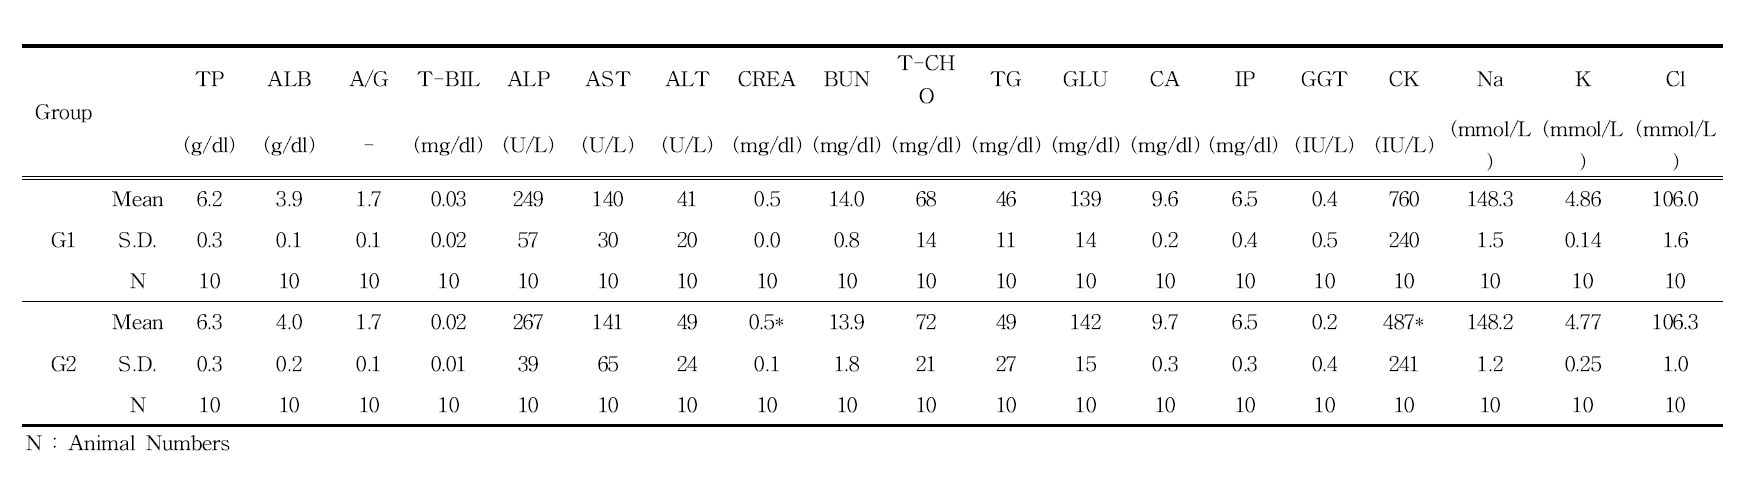 Blood Chemical values of male rats in 3D printed Ti